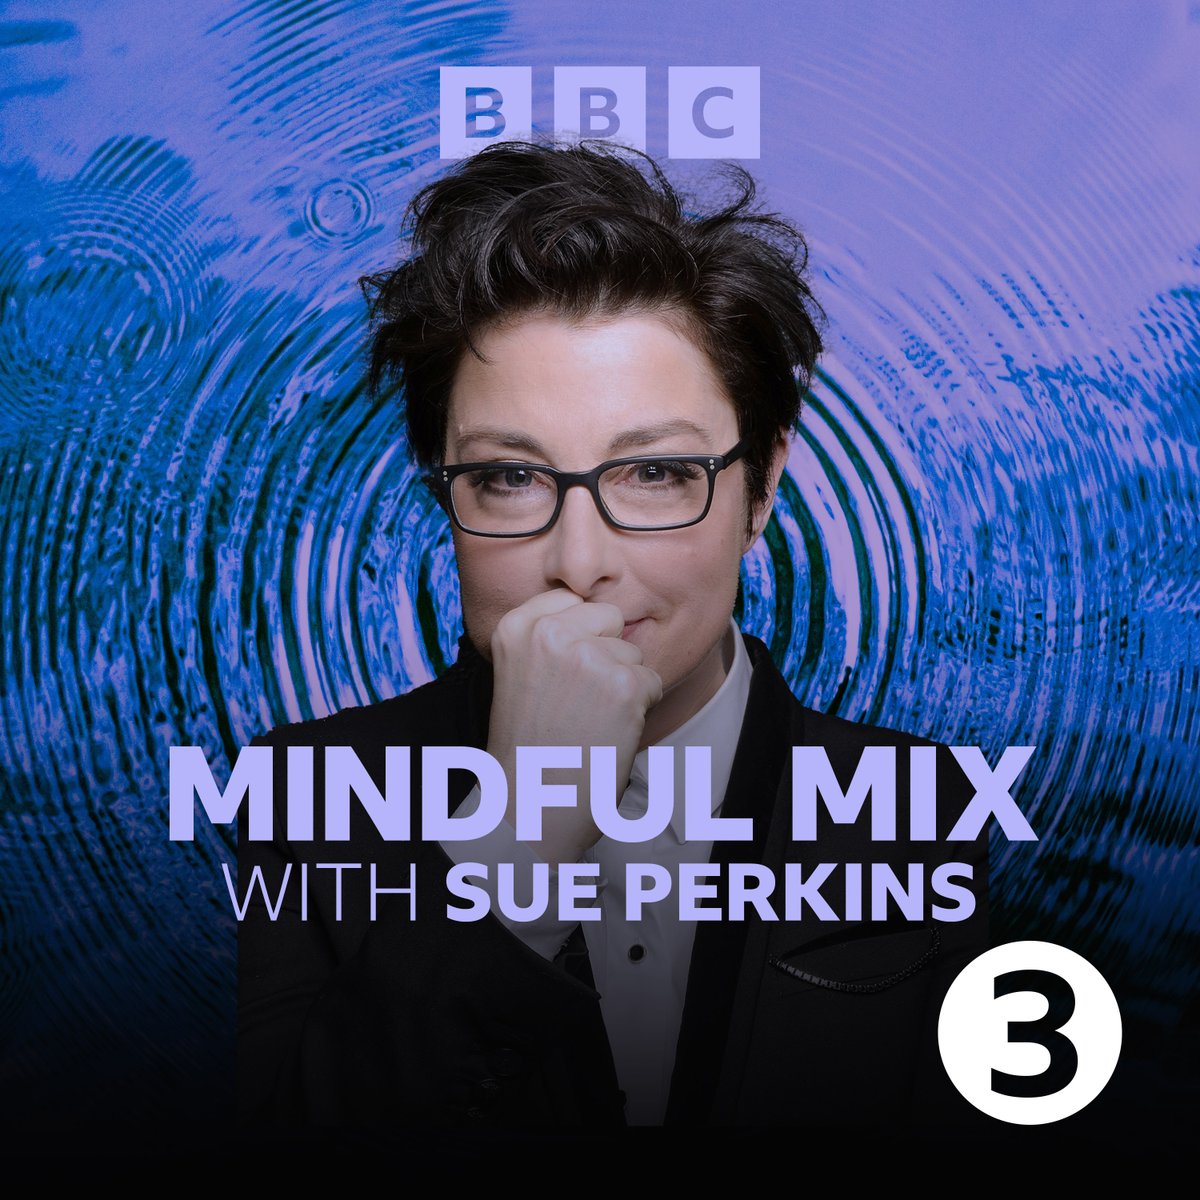 @sueperkins' Mindful Mix is available now on @BBCSounds as part of the BBC's Mental Wellbeing Season: a 2 hour playlist to help you relax and refocus. Listen below 🧘‍♀️🧘‍♀️ bbc.co.uk/sounds/play/p0…